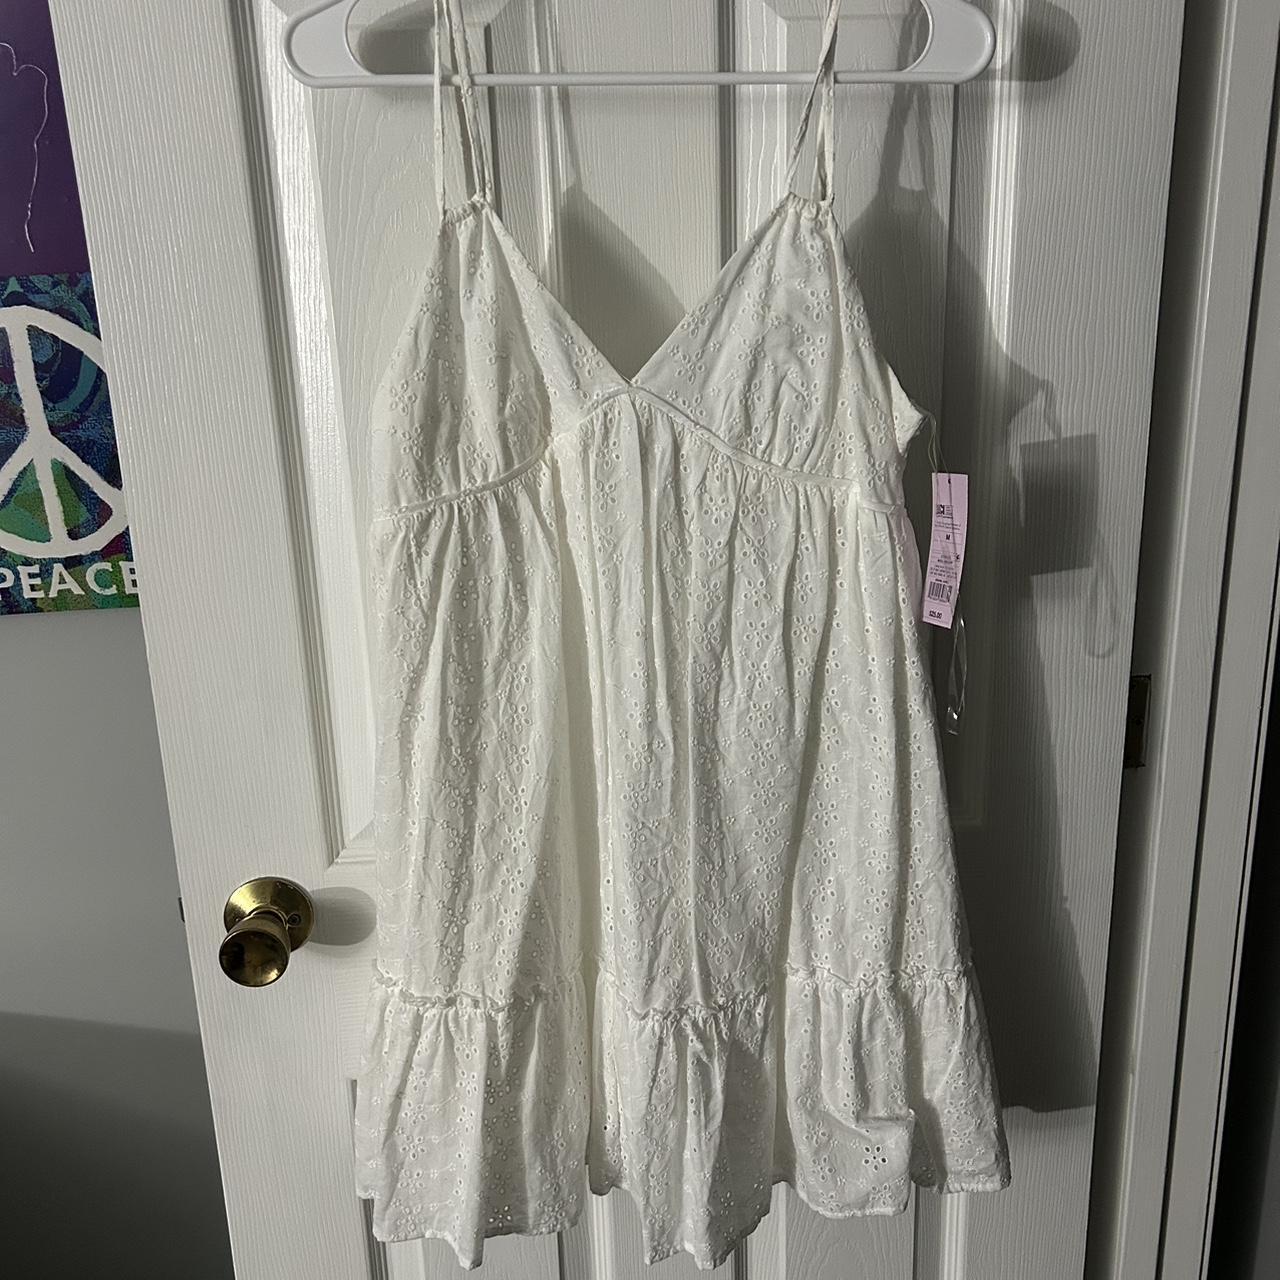 white target dress only worn for try on tags still on - Depop